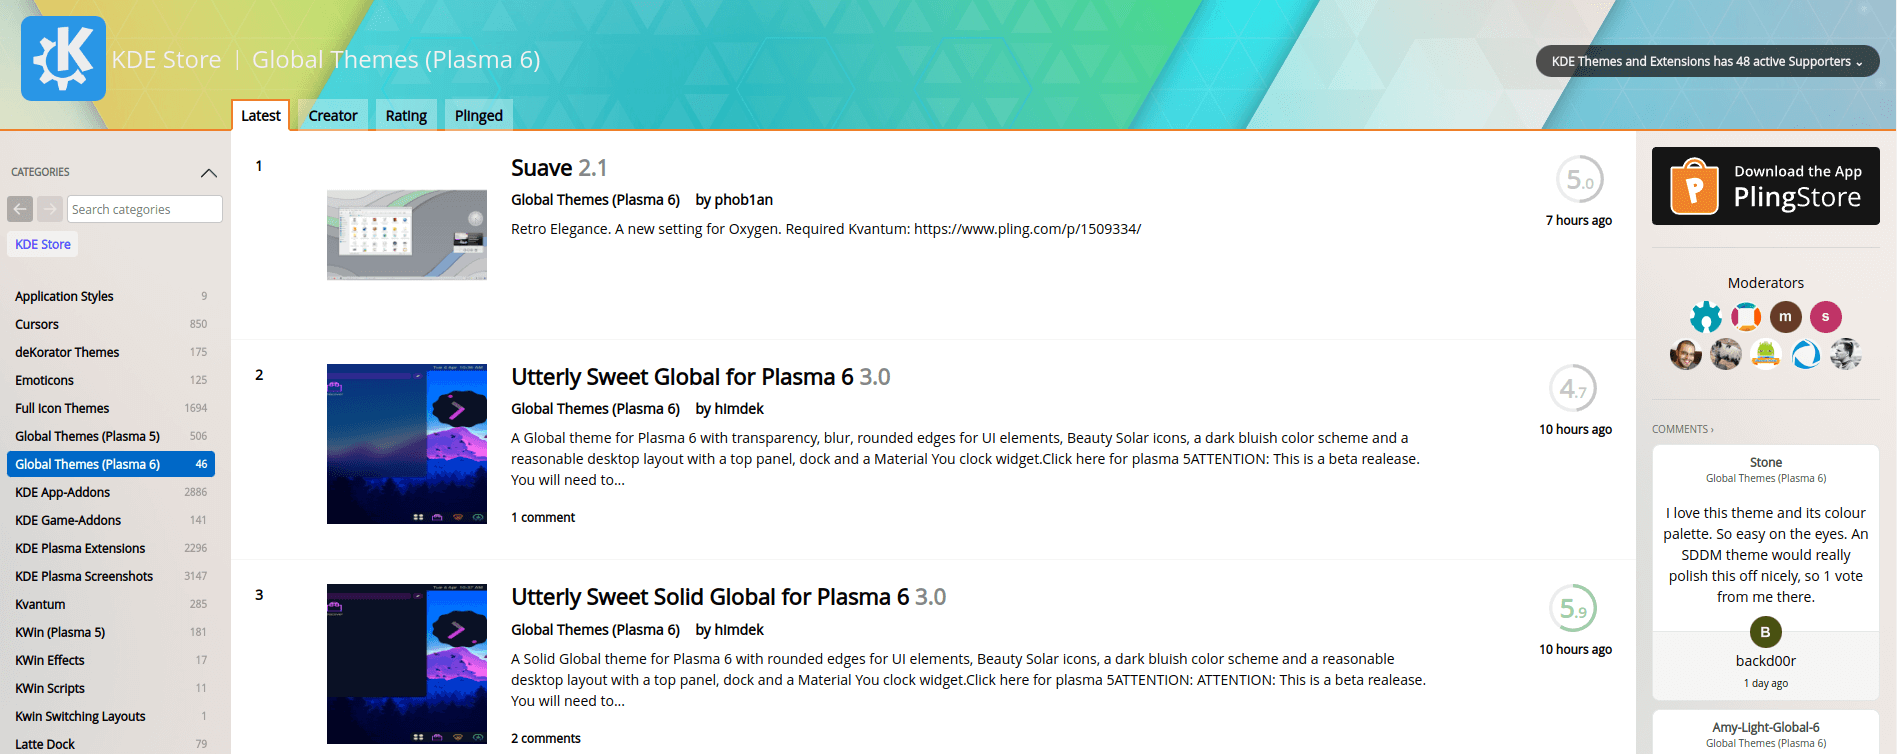 a screenshot of the global themes pages in the kde store